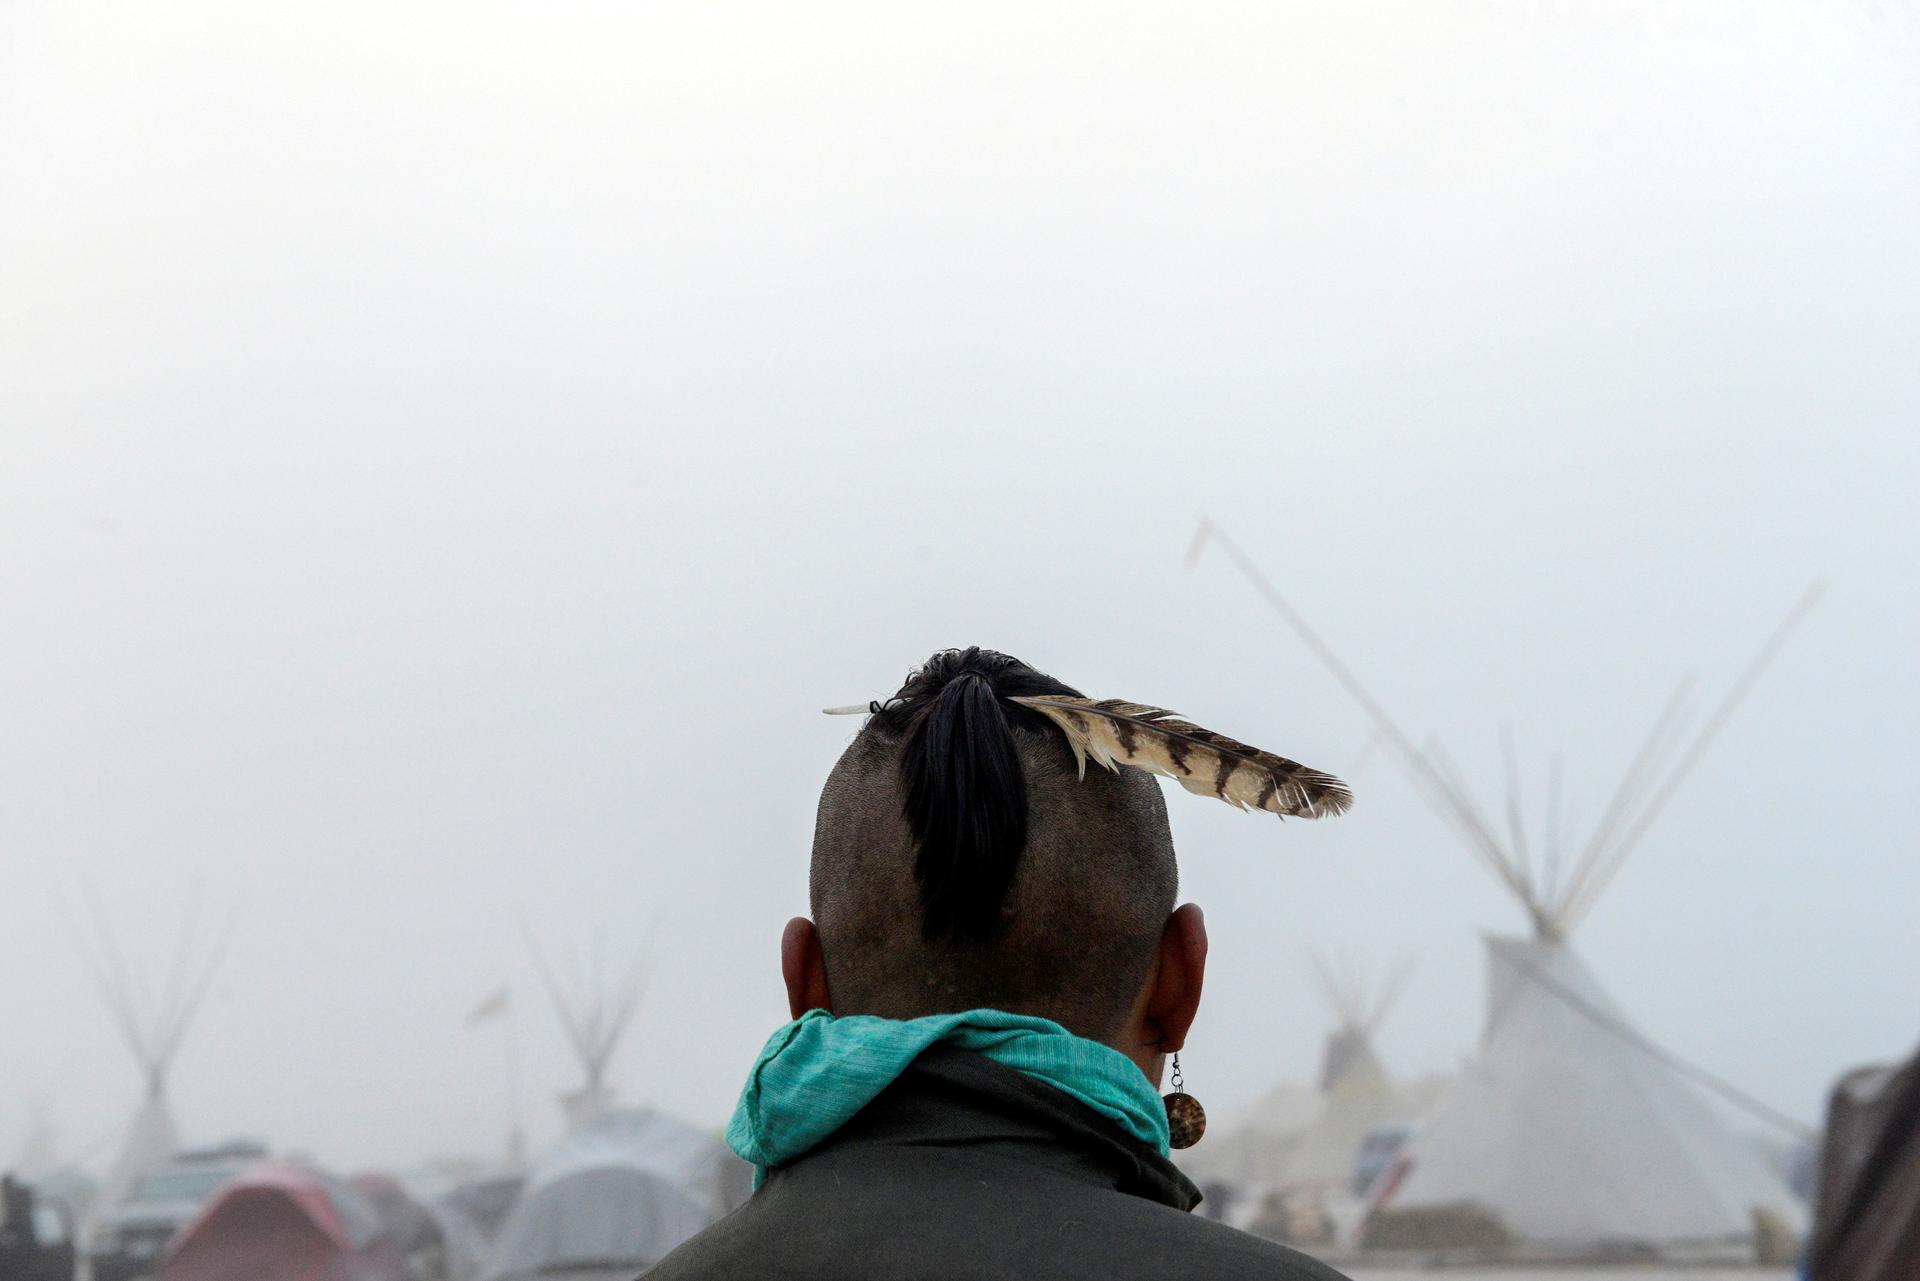 A man from the Muskogee tribe looks at the Oceti Sakowin shrouded in mist during a protest against the Dakota Access pipeline near the Standing Rock Indian Reservation.